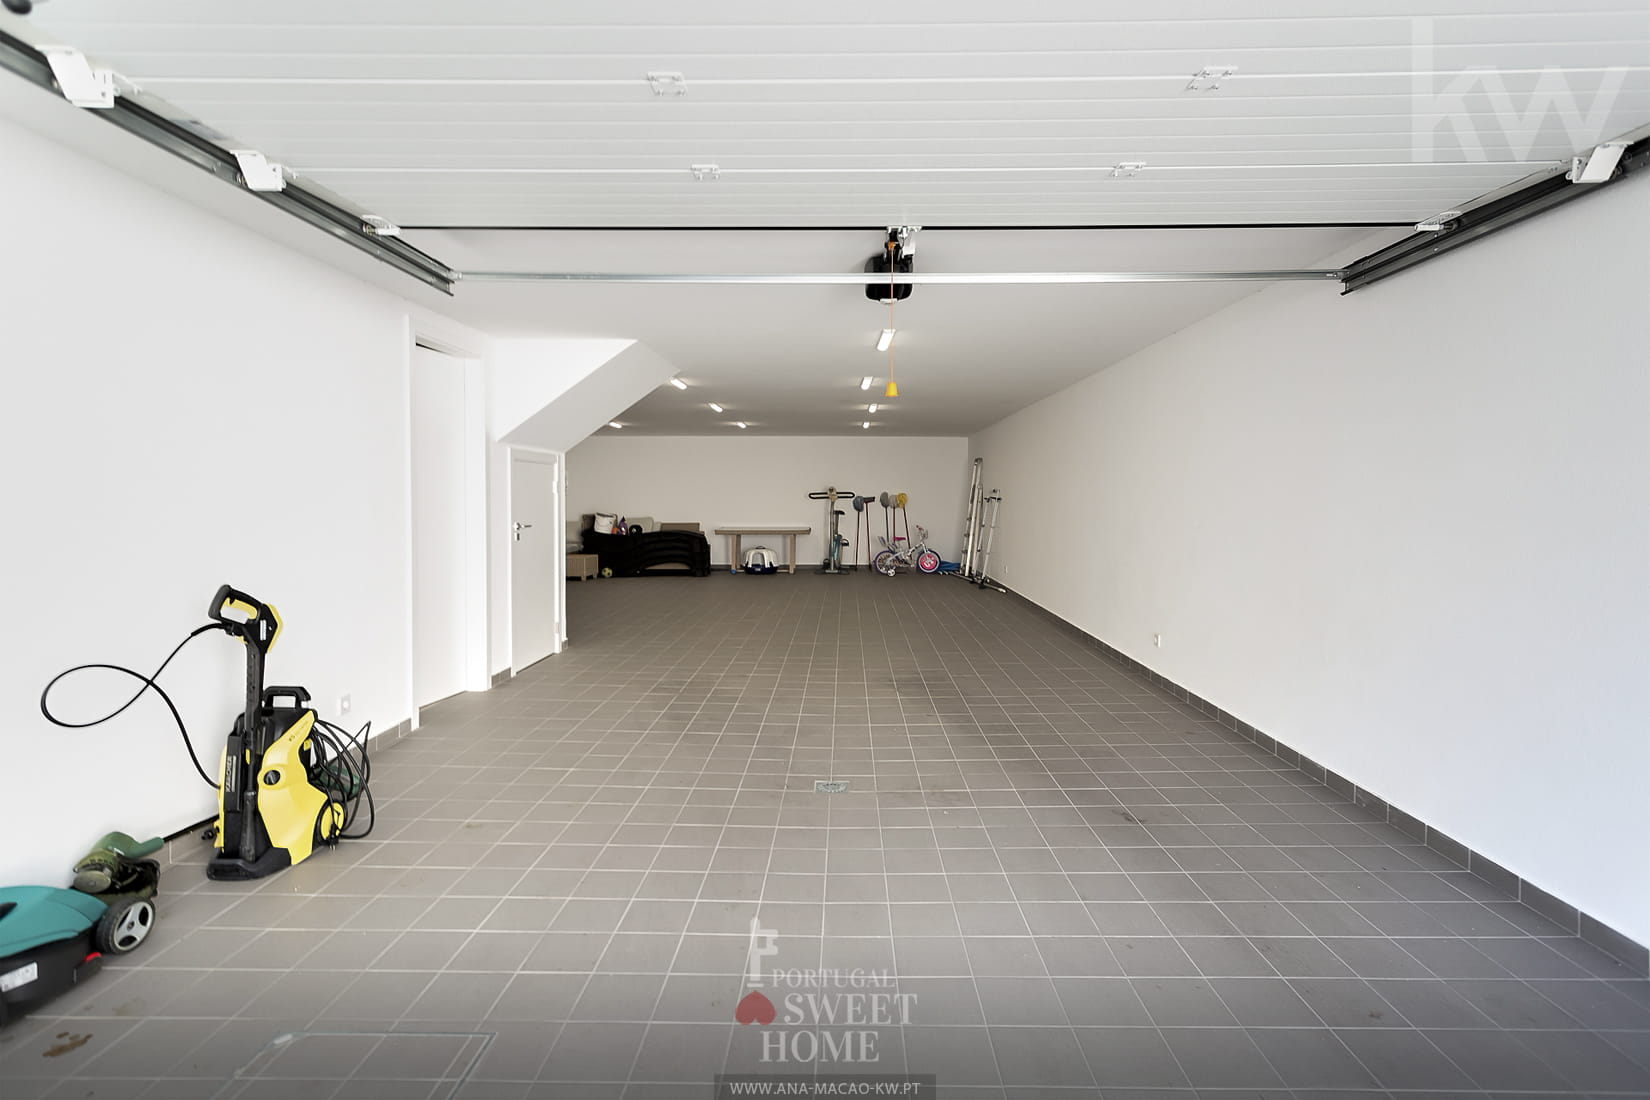 Large garage (80 m²) for 3 or 4 cars